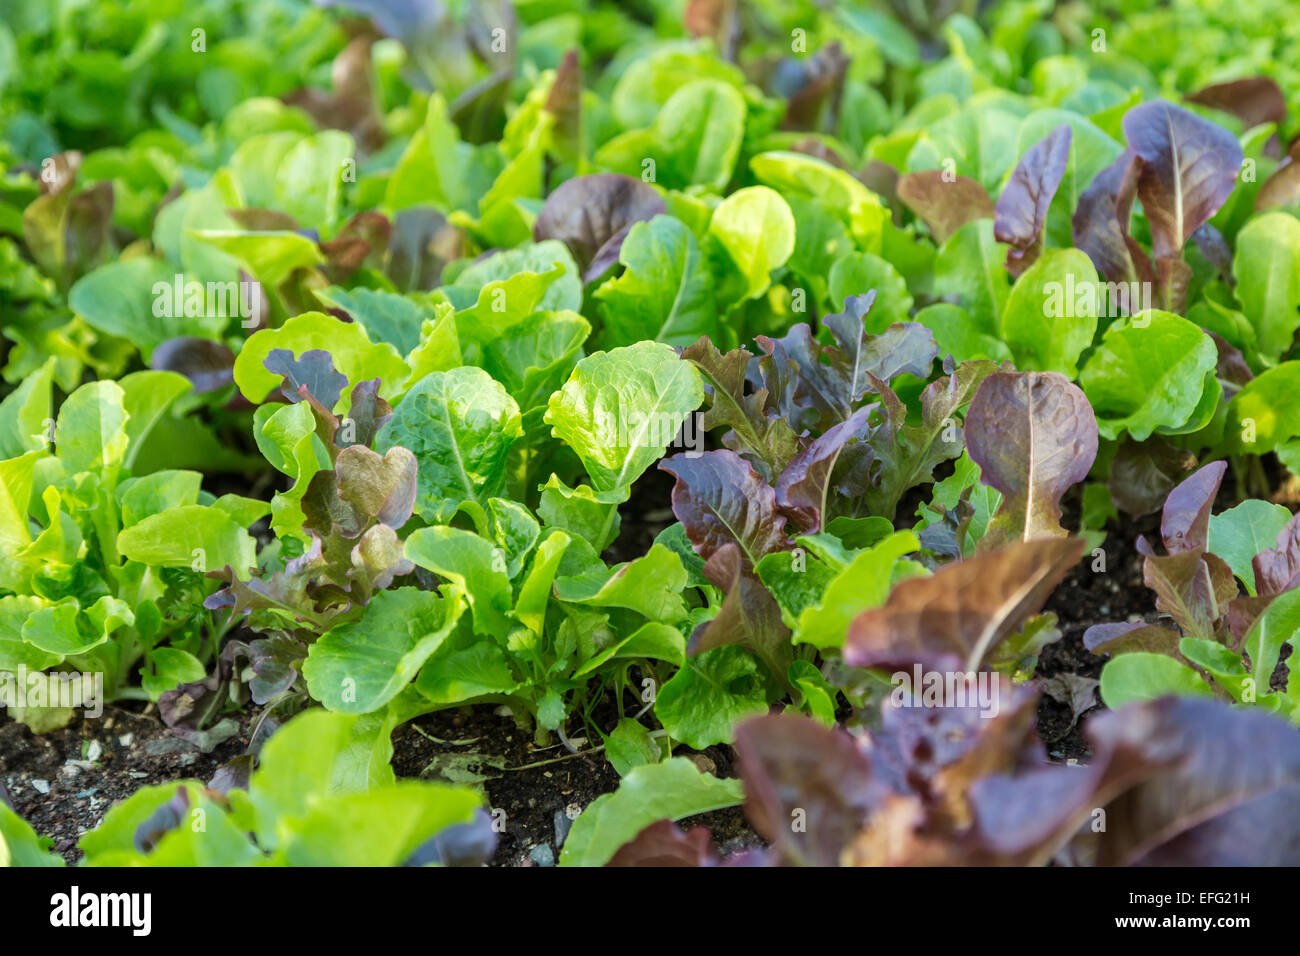 Multi colored leaf lettuce growing in the garden. Stock Photo